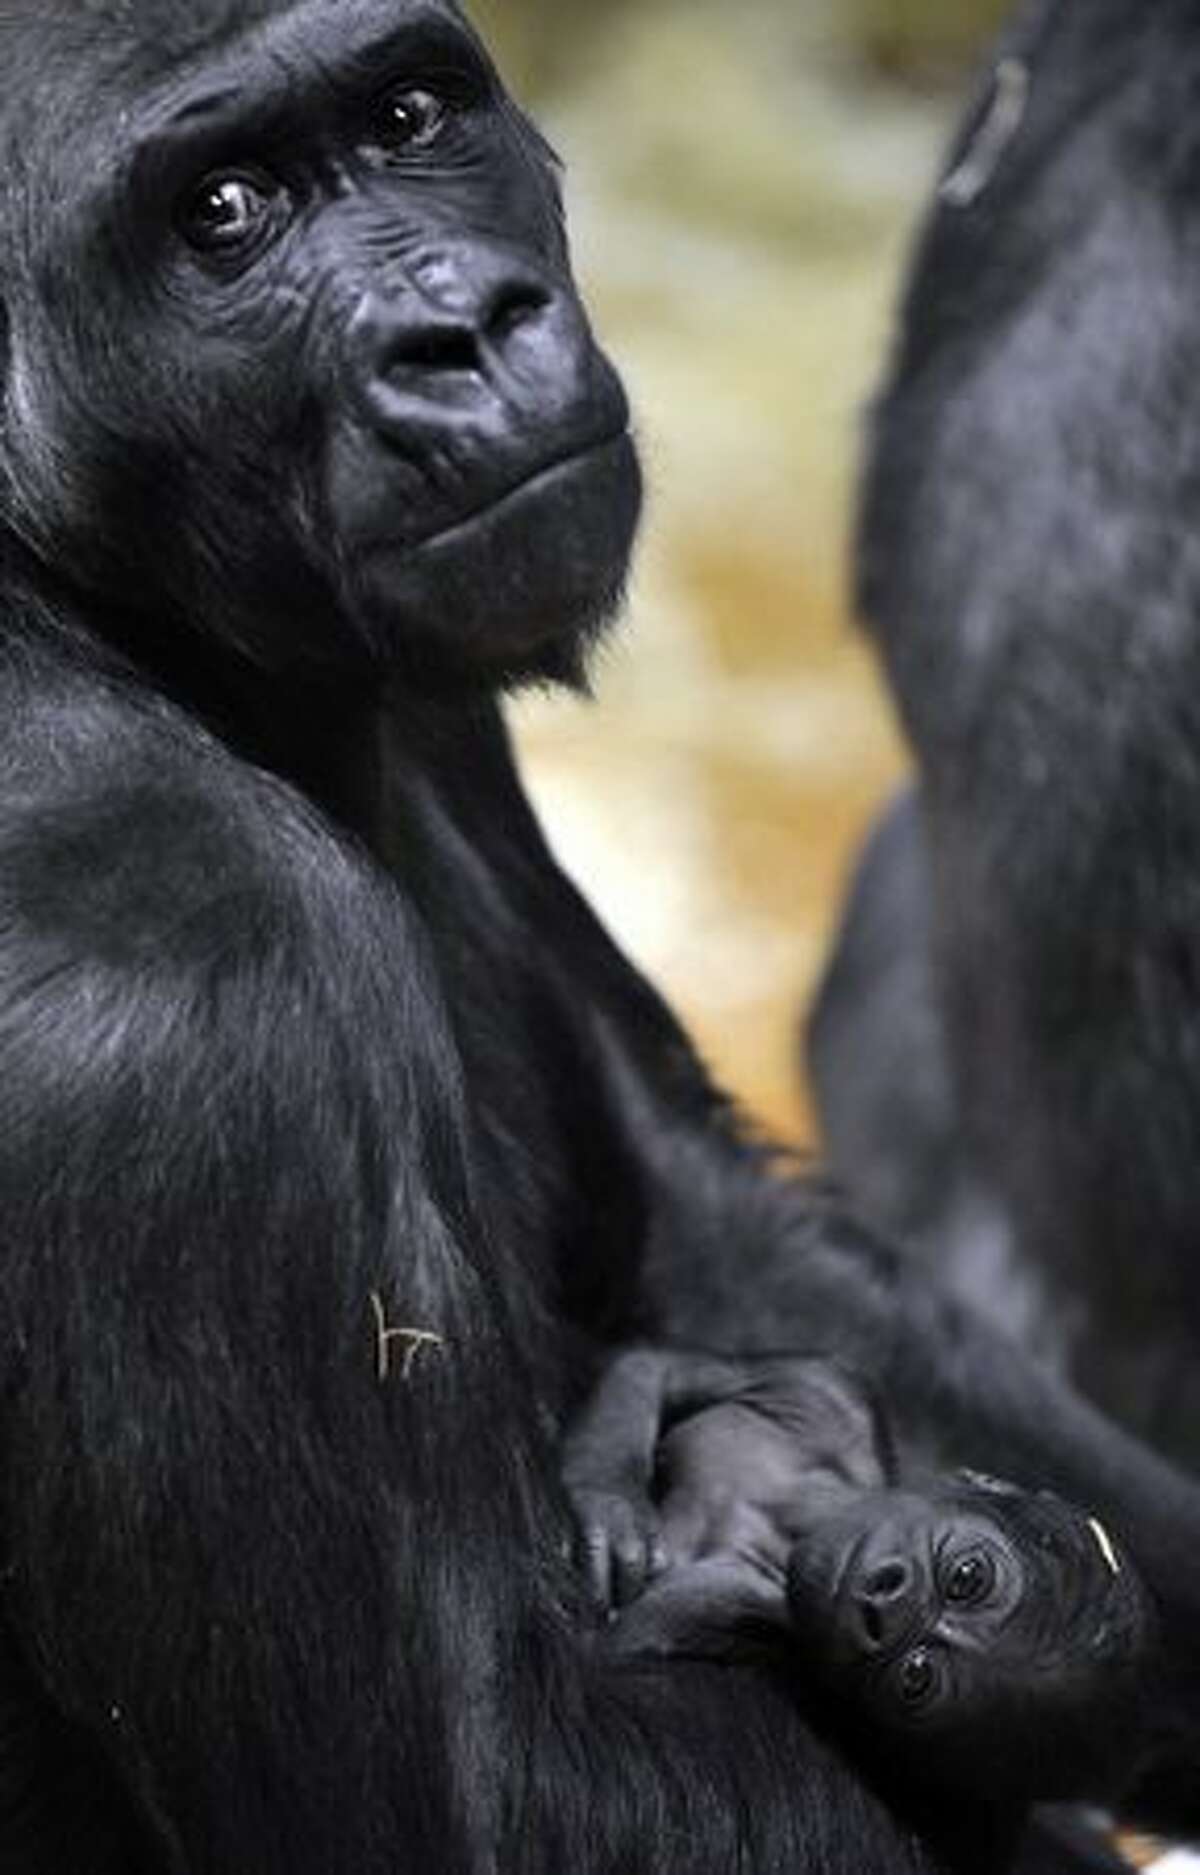 A baby gorilla hangs on its mother N'Yaounda in the Budapest Zoo.